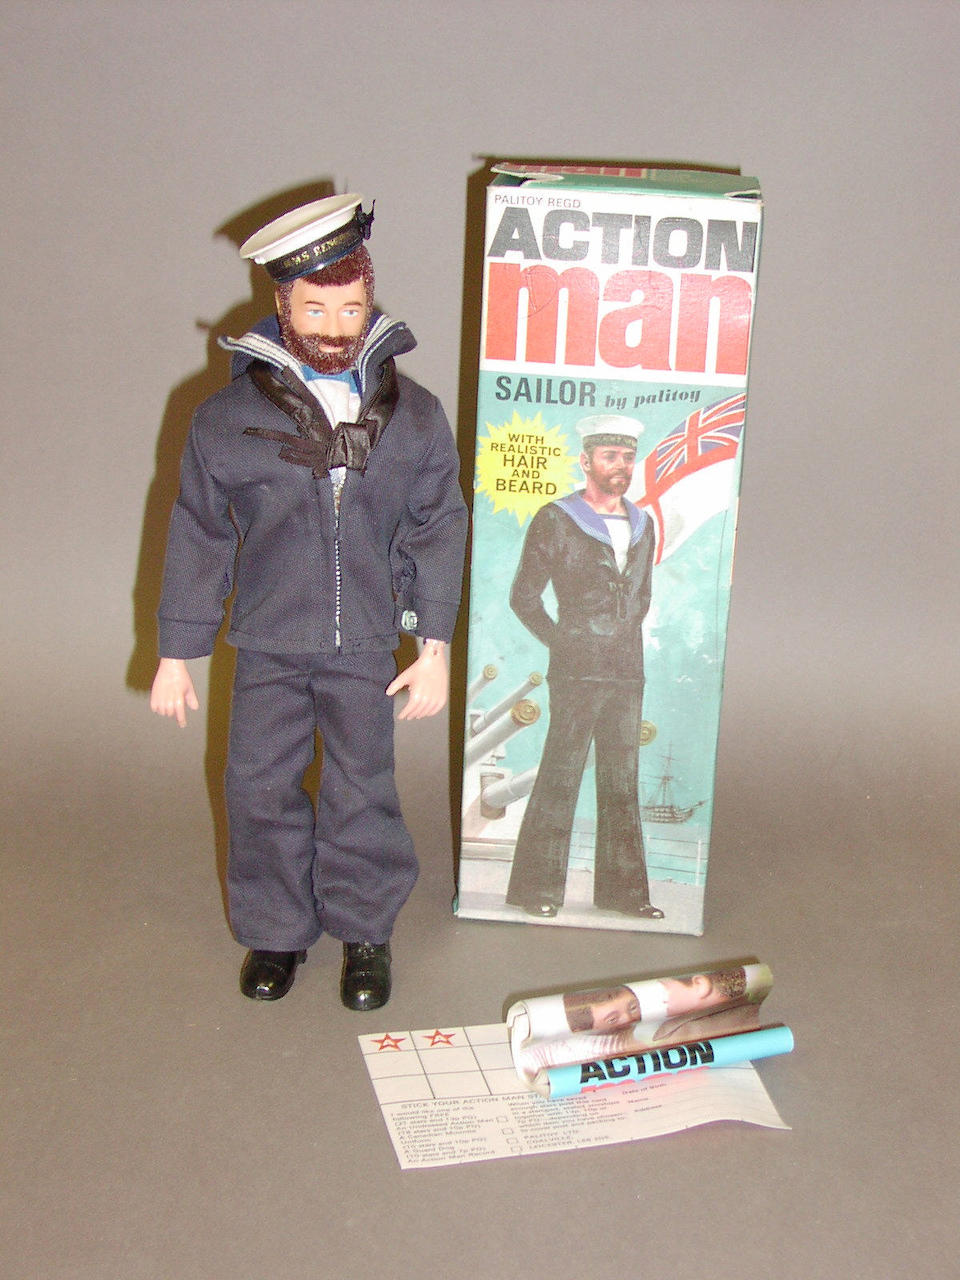 Giving at the Office: Palitoy's Action Man